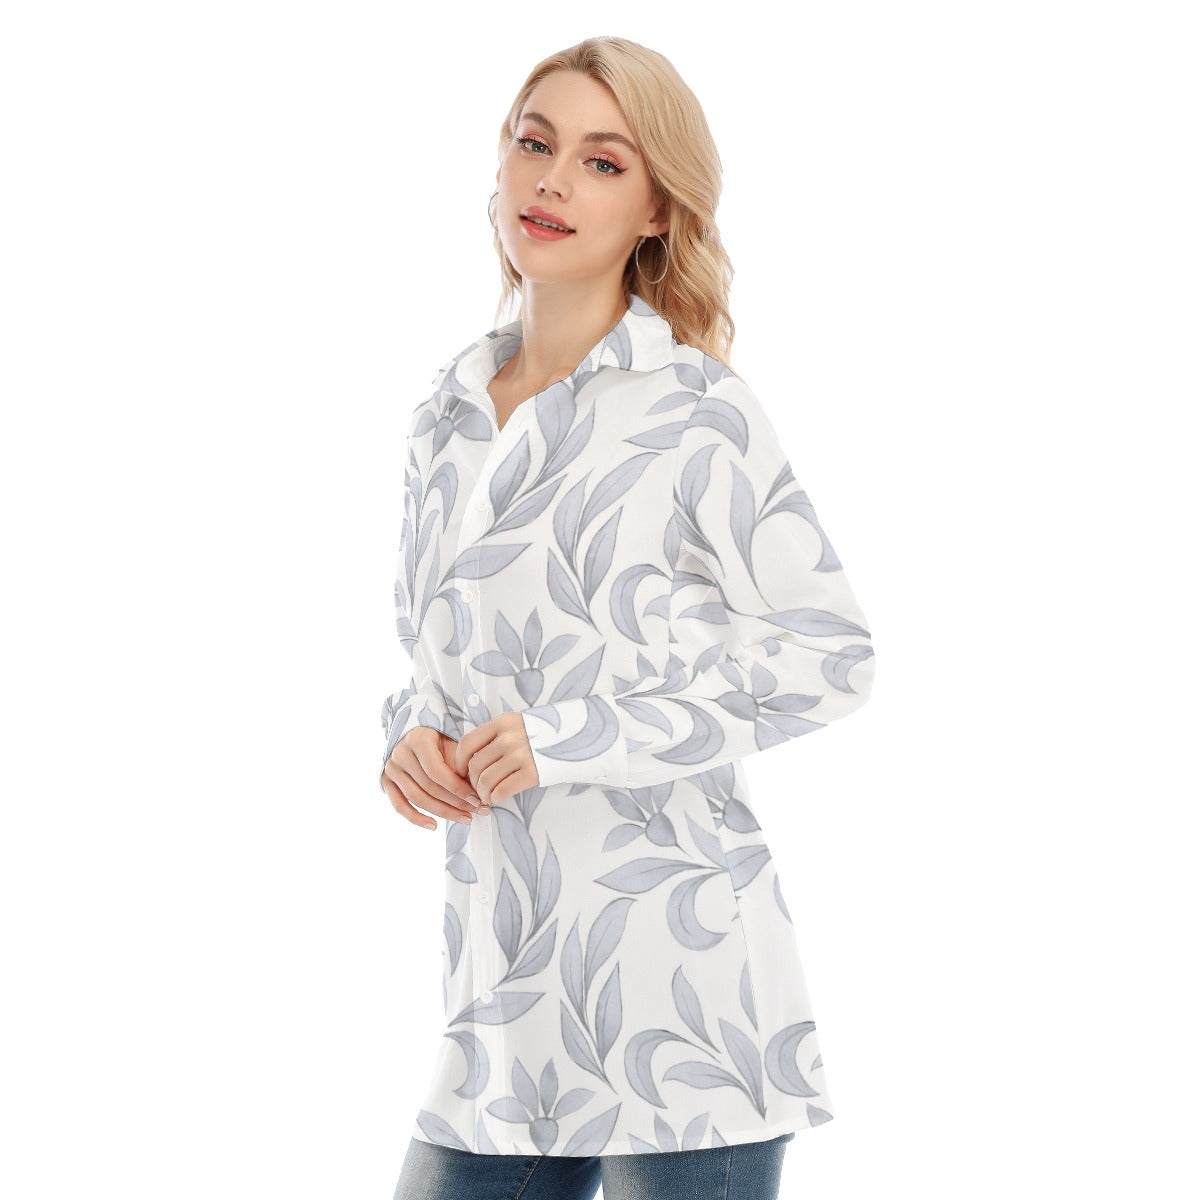 3R9FQ All-Over Print Women's Long Shirt |115GSM 98% Cotton and 2% spandex